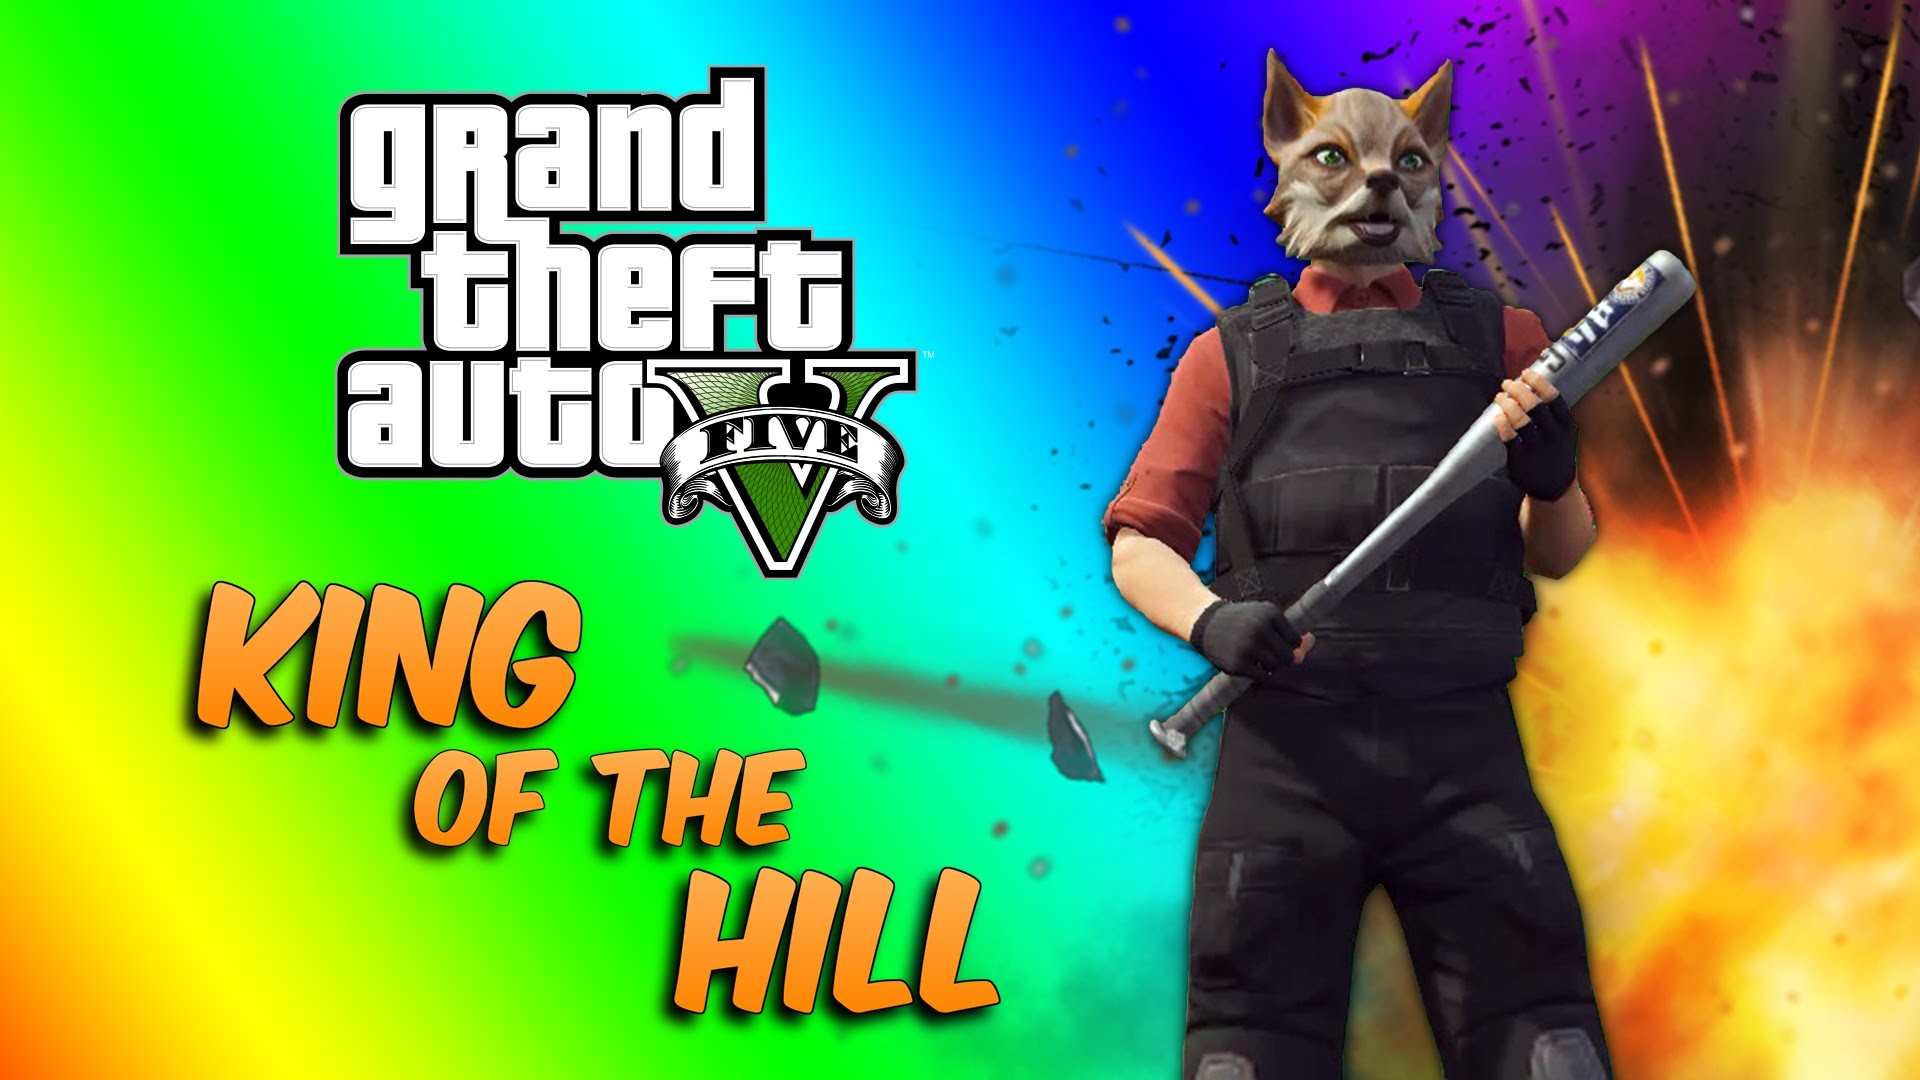 GTA 5 NEW DLC Update Freemode Events Gameplay – King of the Hill Game Mode is FUN GTAV